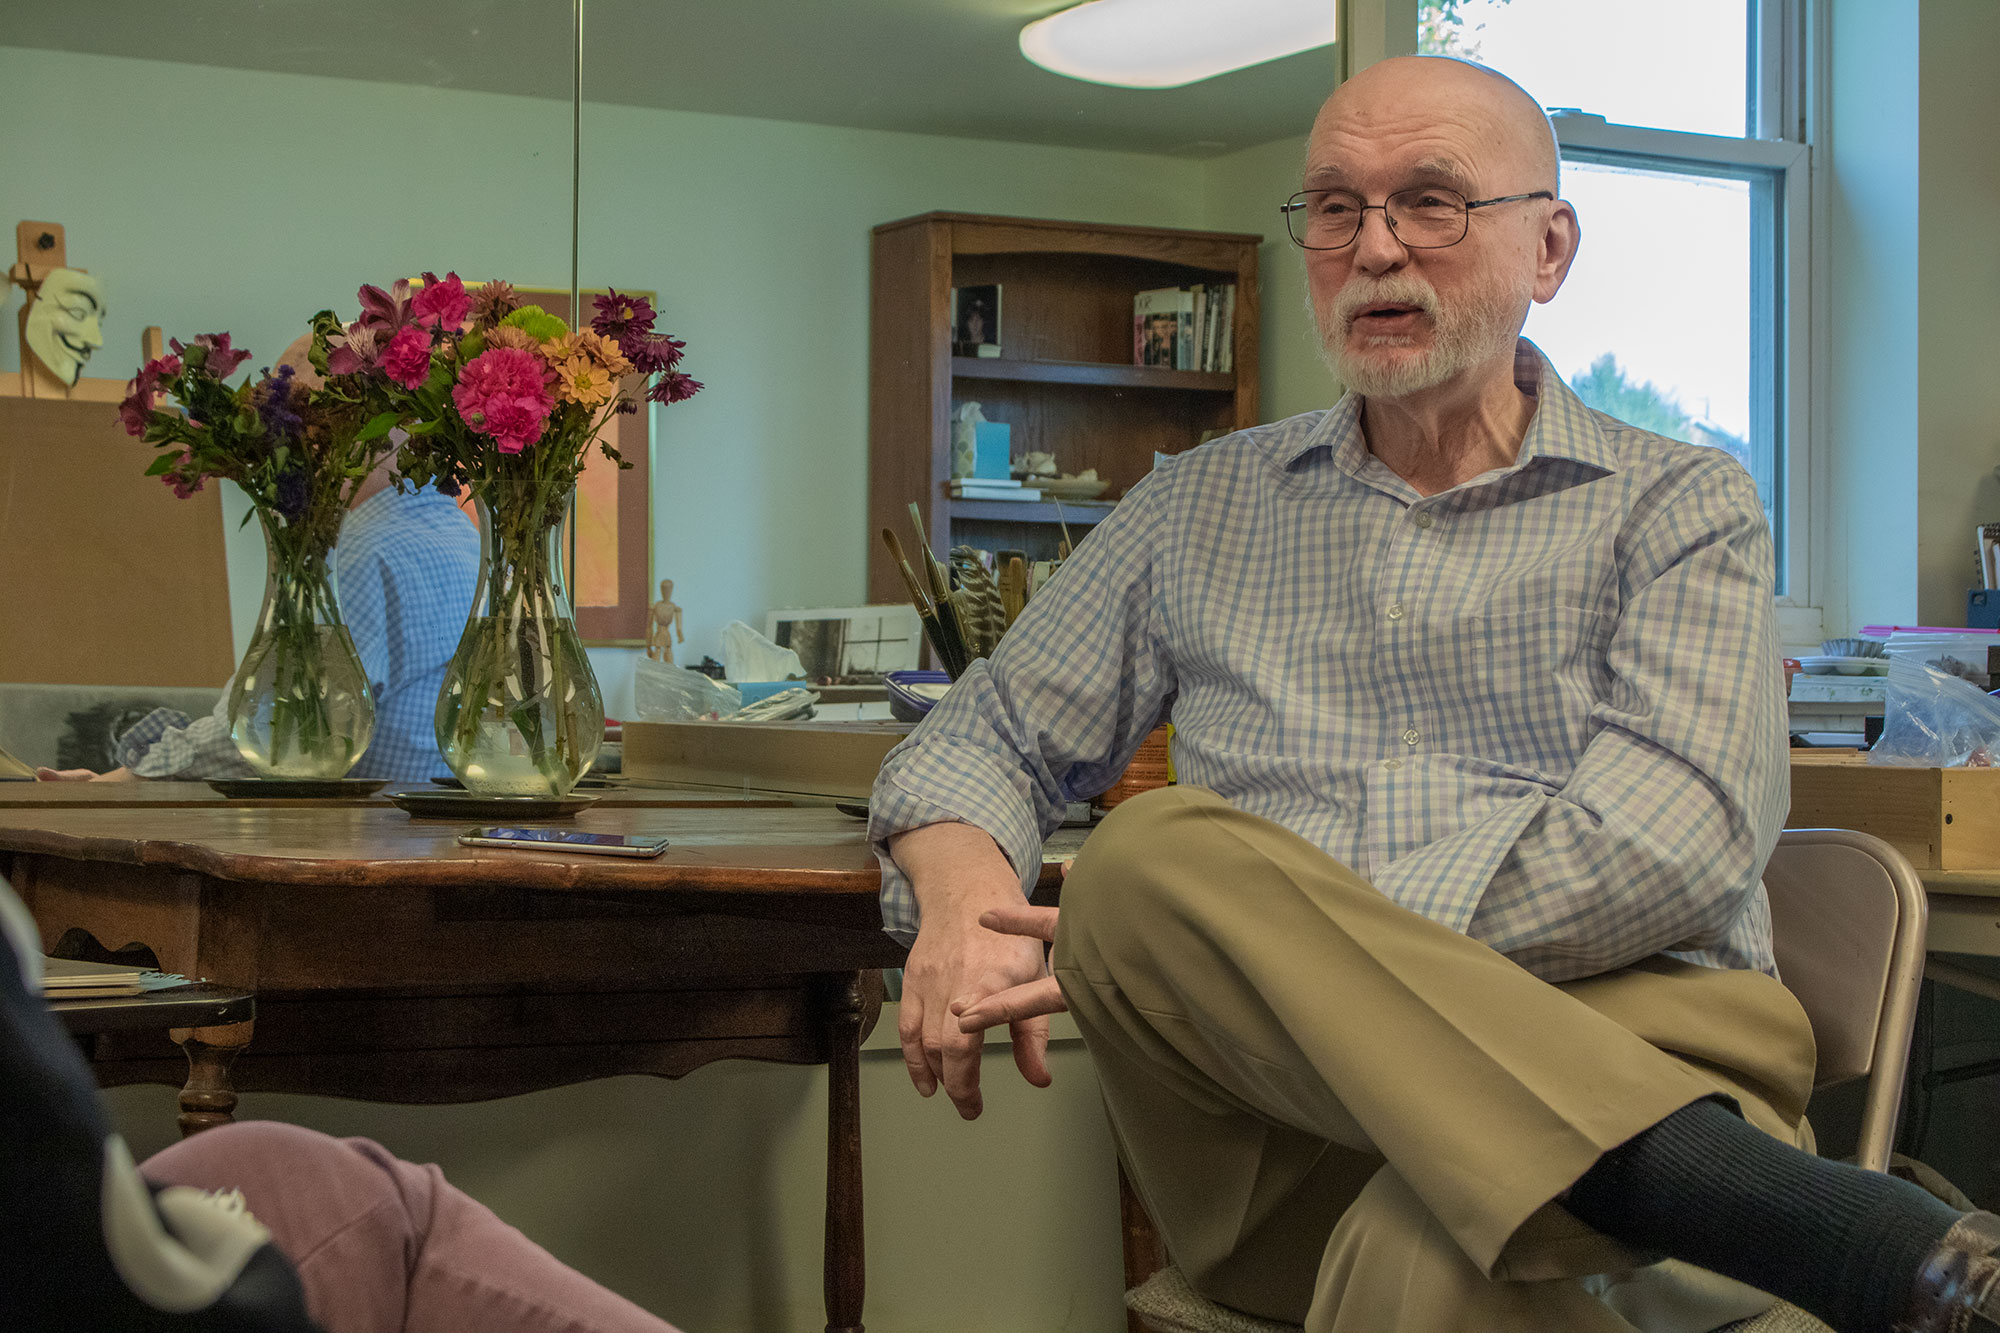 Professor emeritus Claude Cookman sits in a chair next to a table with a vase of flowers, in front of a mirror.